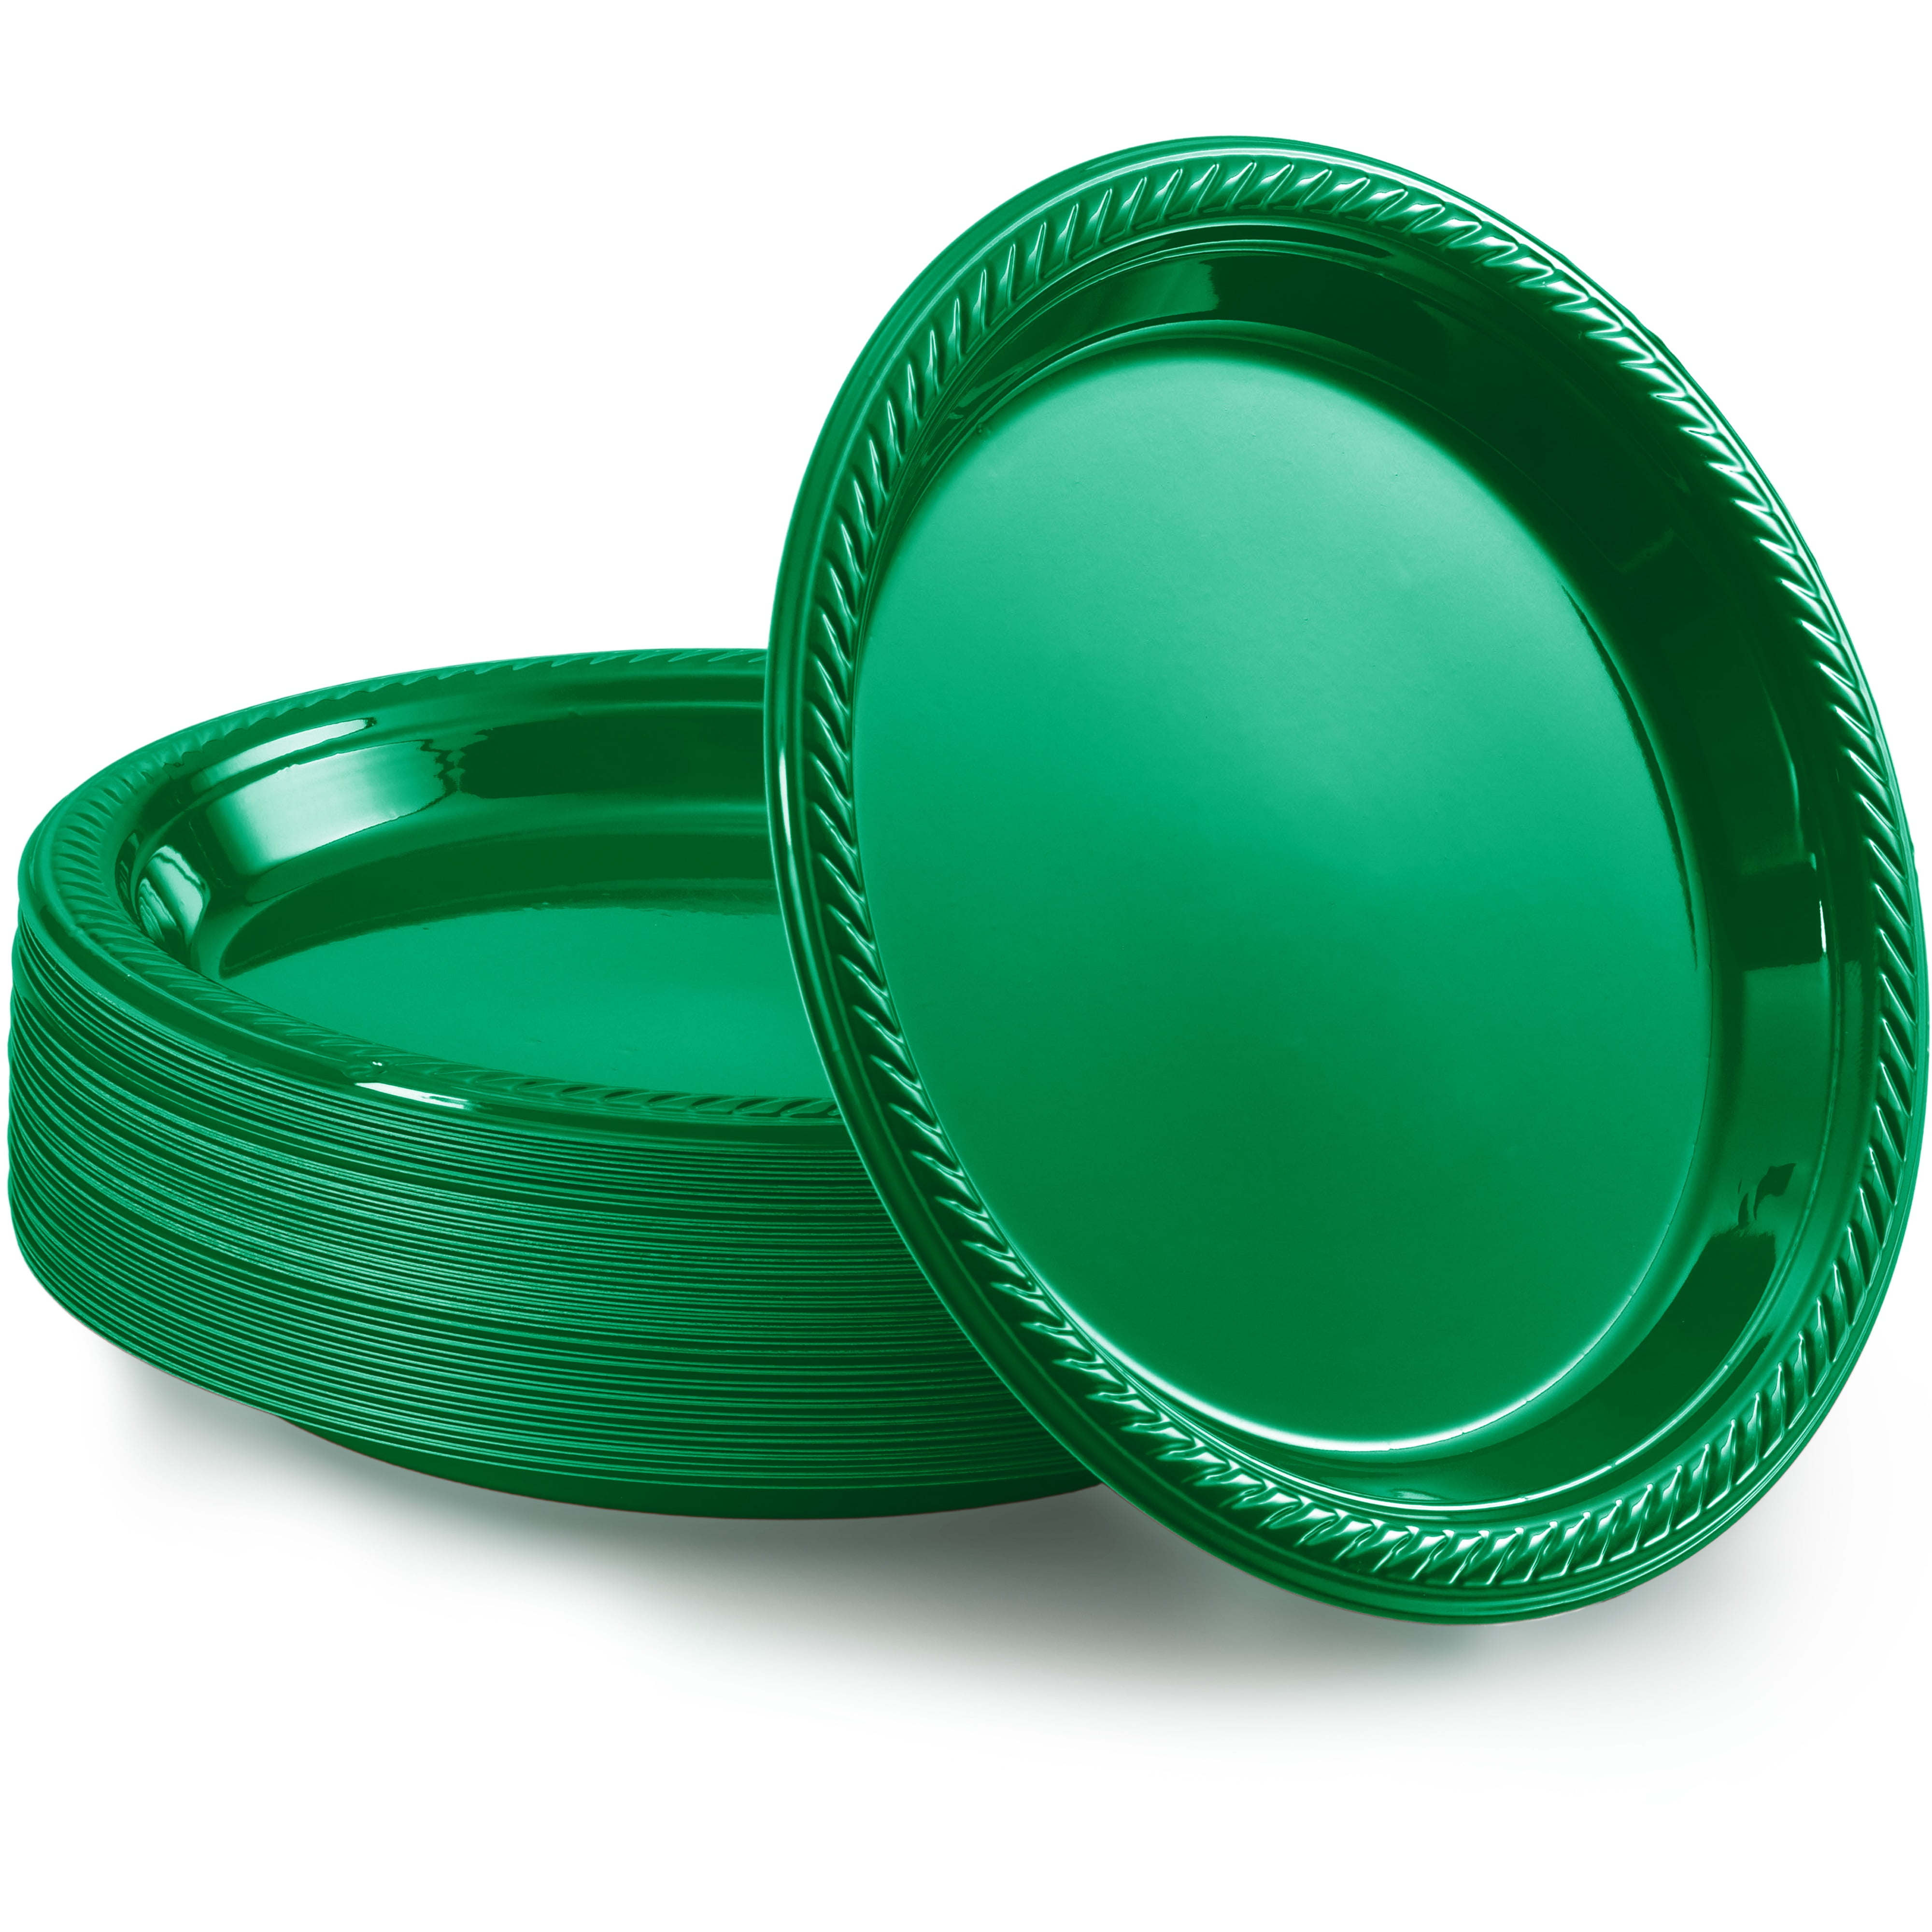 Disposable Paper Plates Green, 6 3/4 Inches Paper Dessert Plates, Strong  and Sturdy Disposable Plates for Party, Dinner, Holiday, Picnic, or Travel